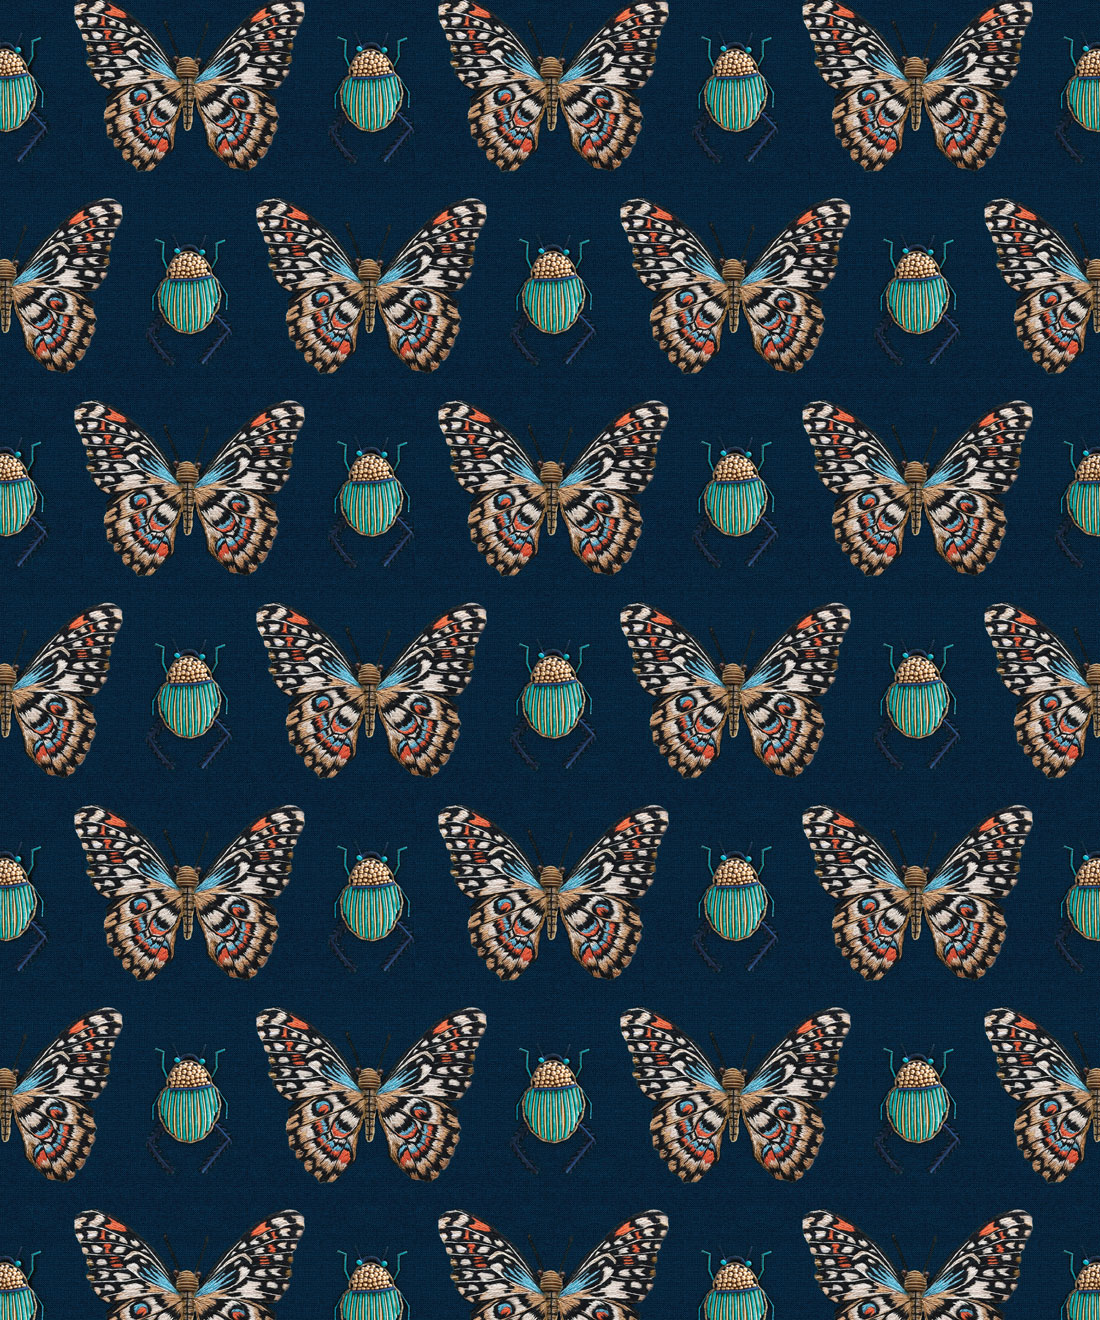 Beetle & Butterfly Wallpaper • Handcrafted Europe